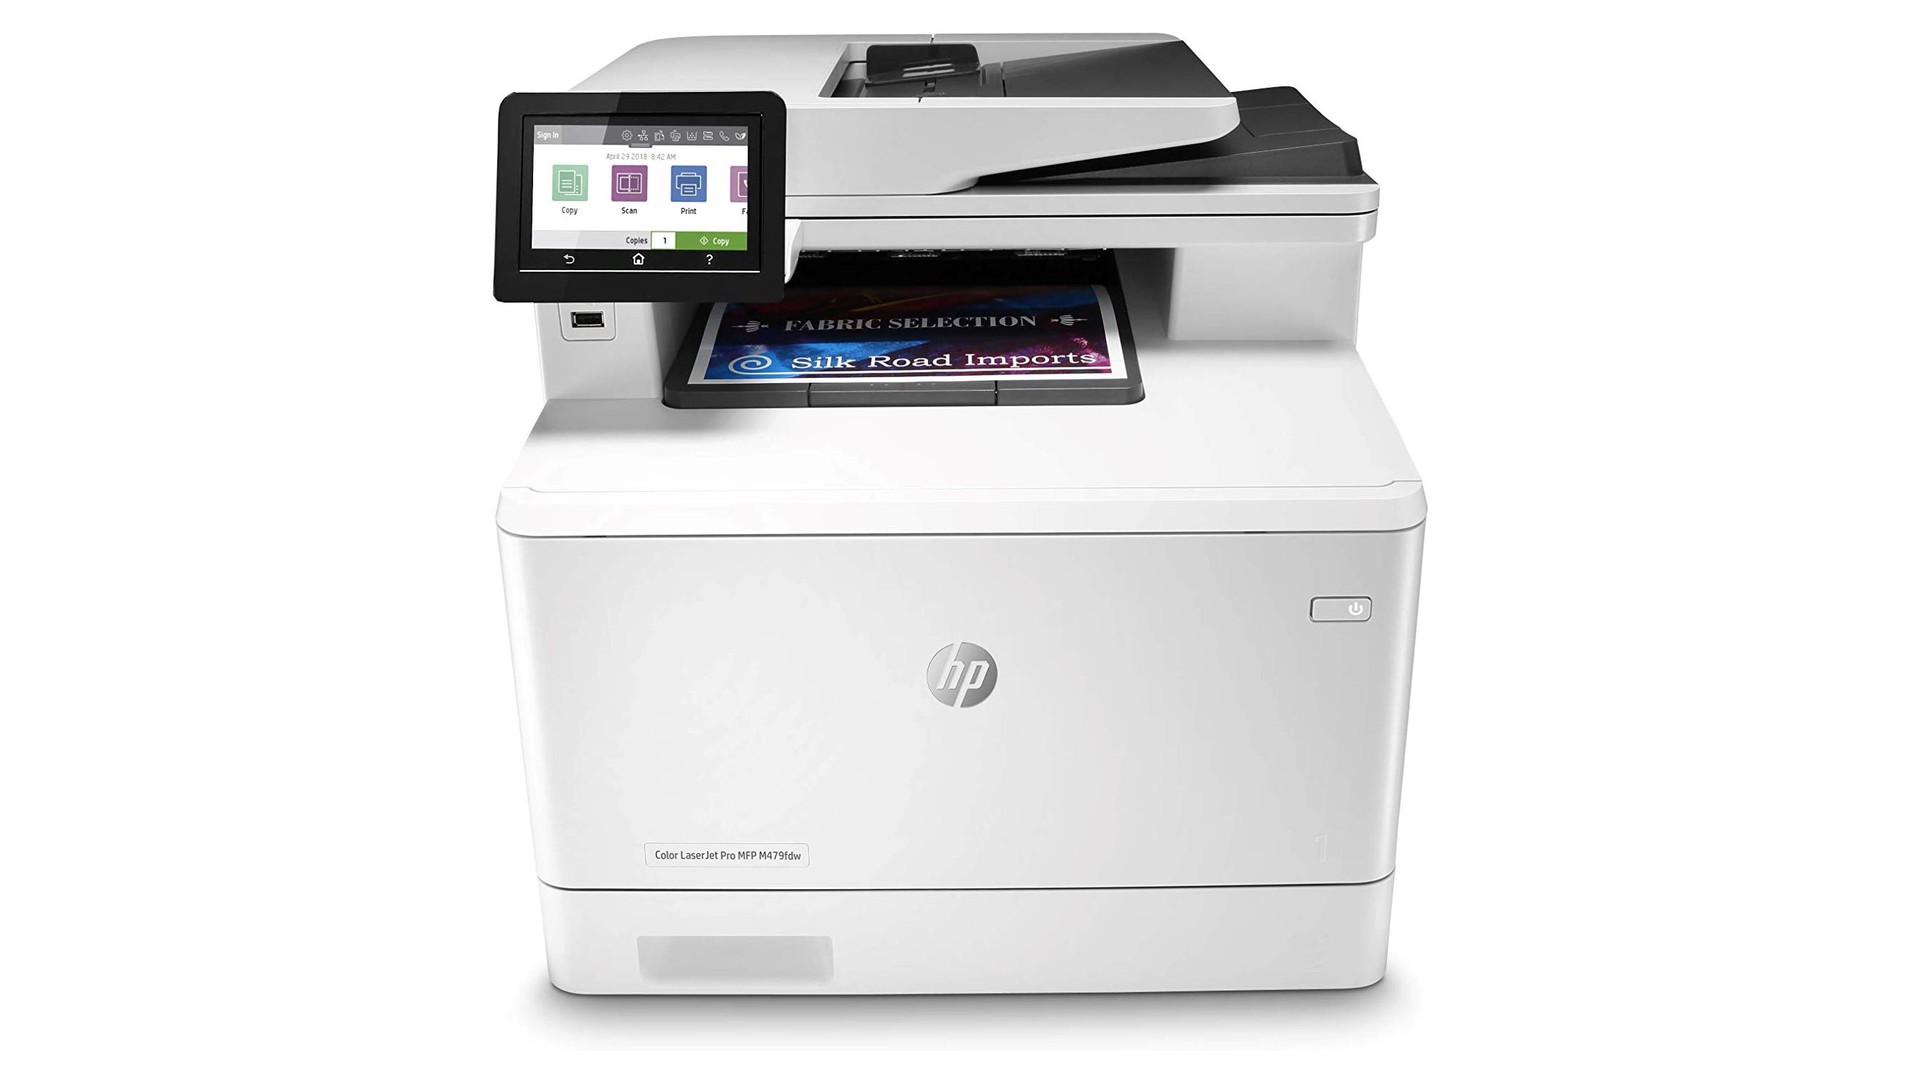 HP Color LaserJet Pro Multifunction M479fdw all in one printer